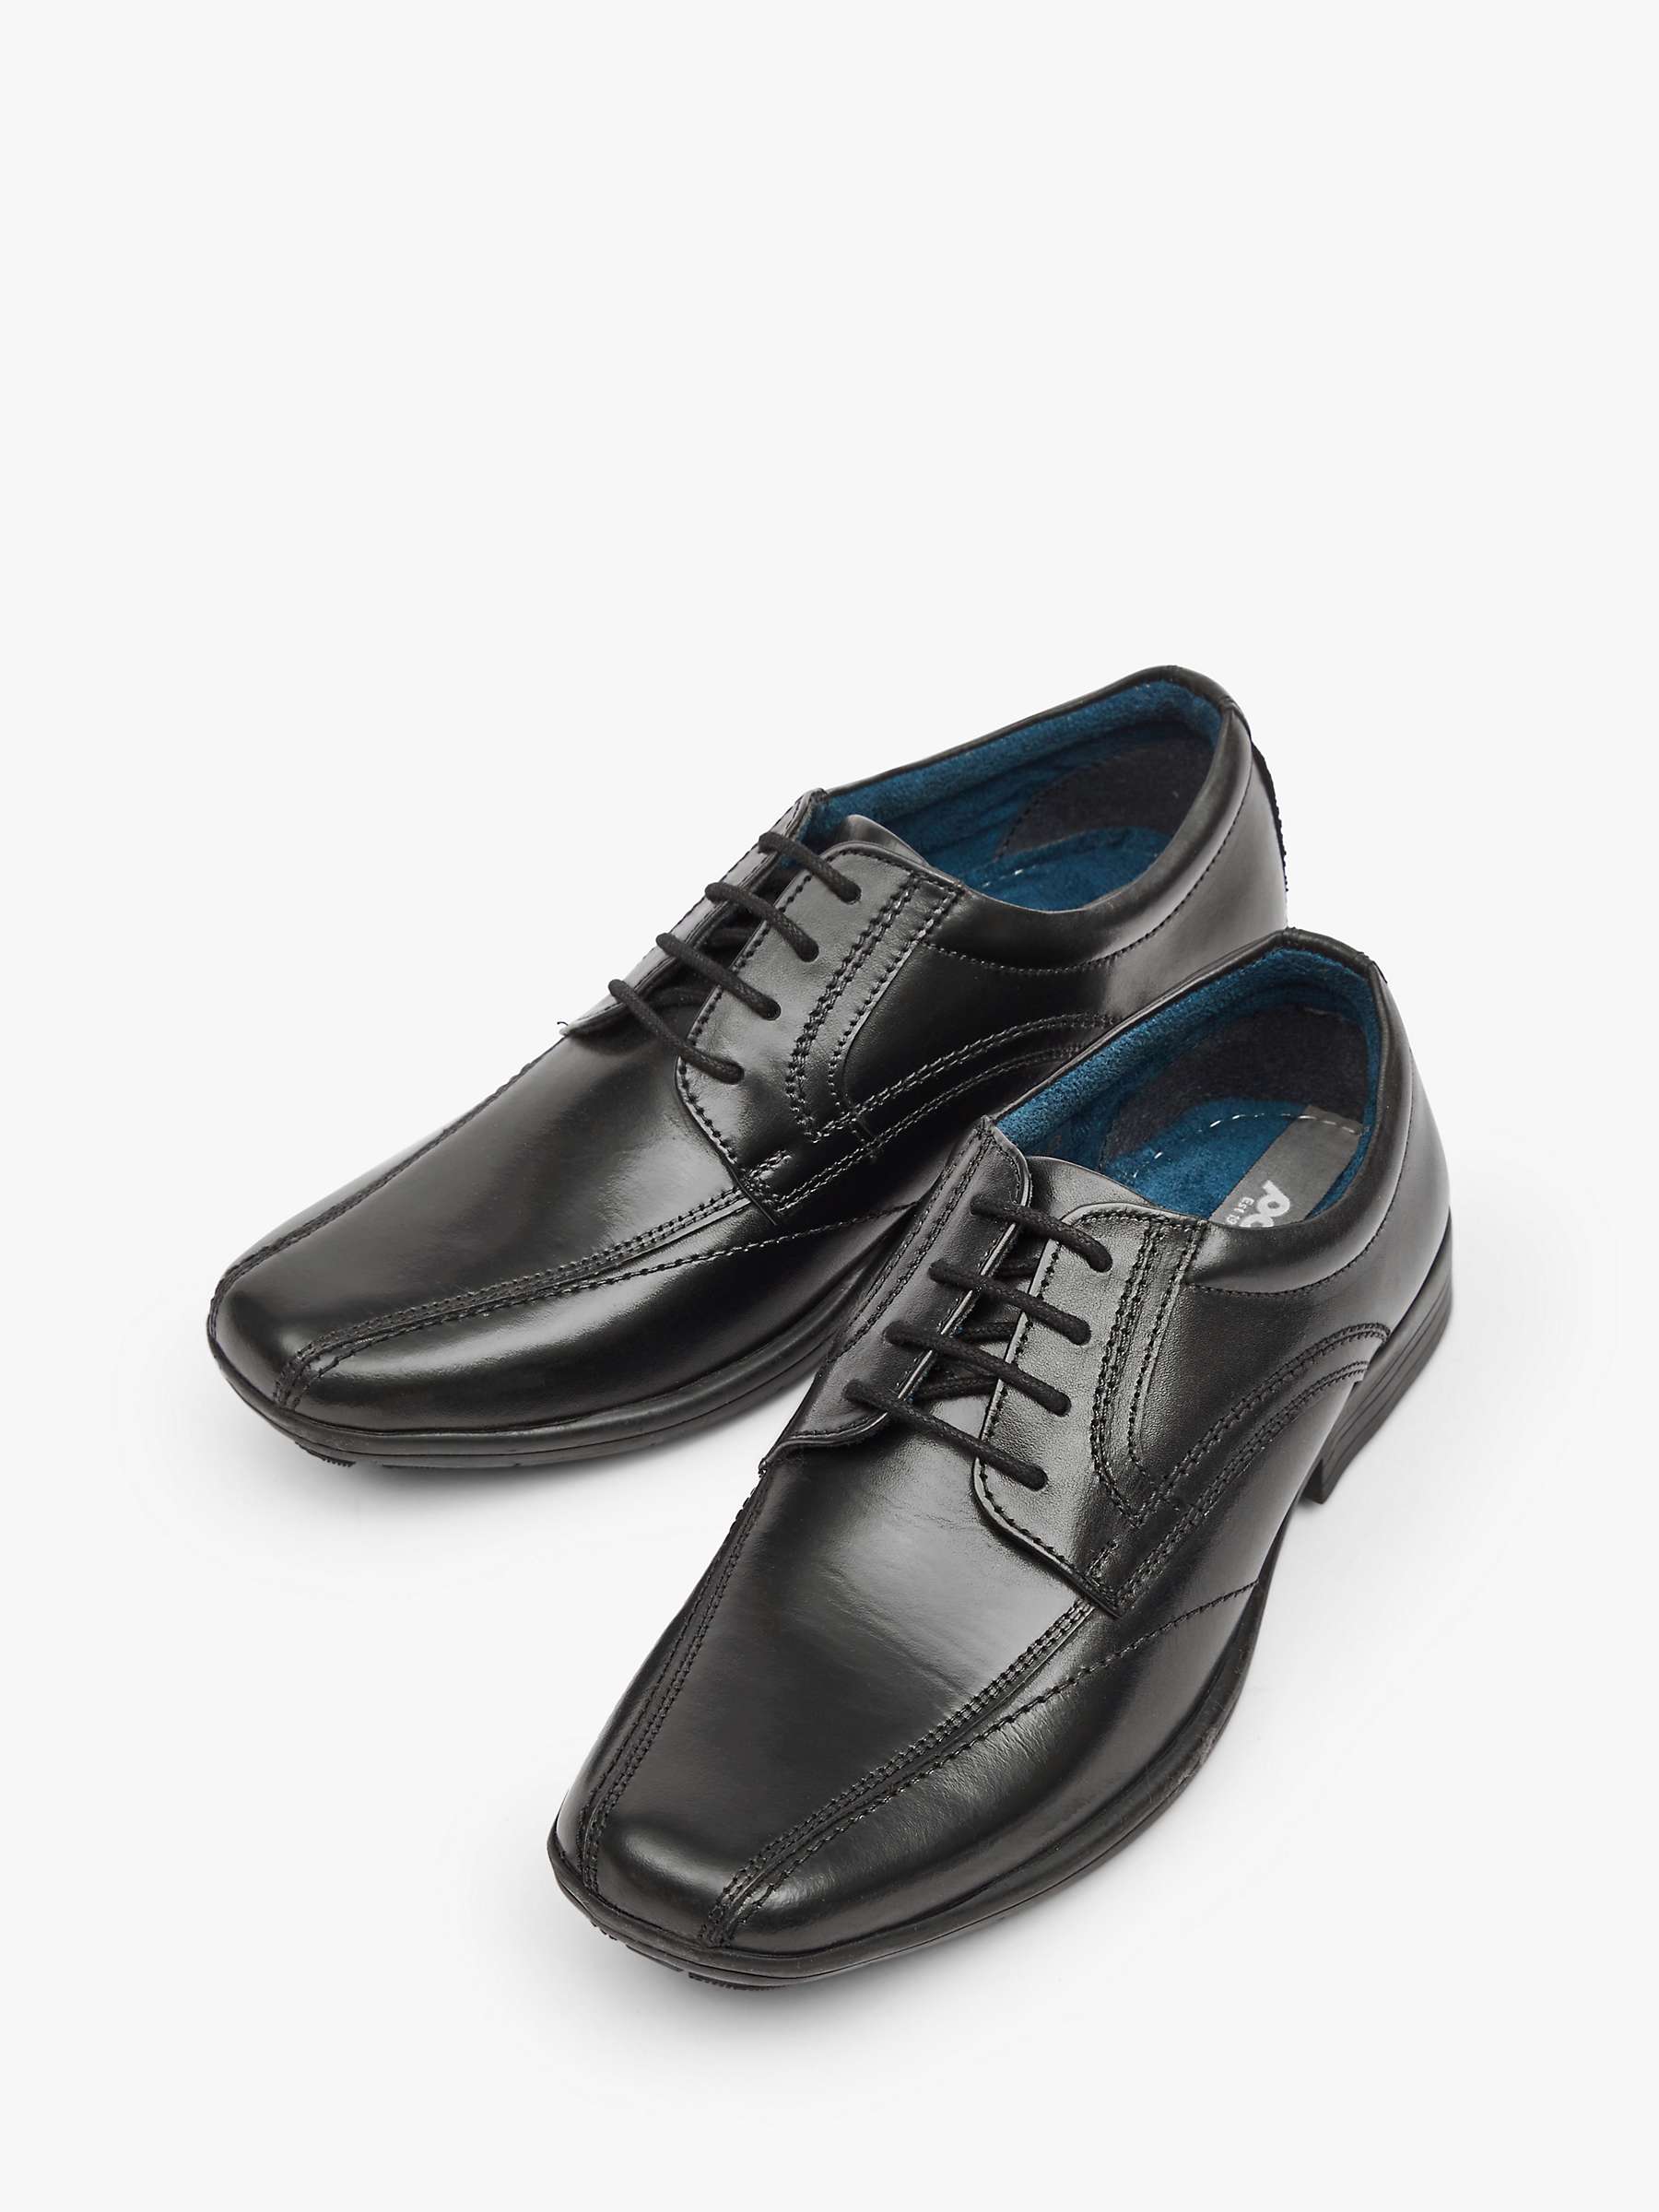 Buy Pod Kids' Angus Leather Shoes, Black Online at johnlewis.com